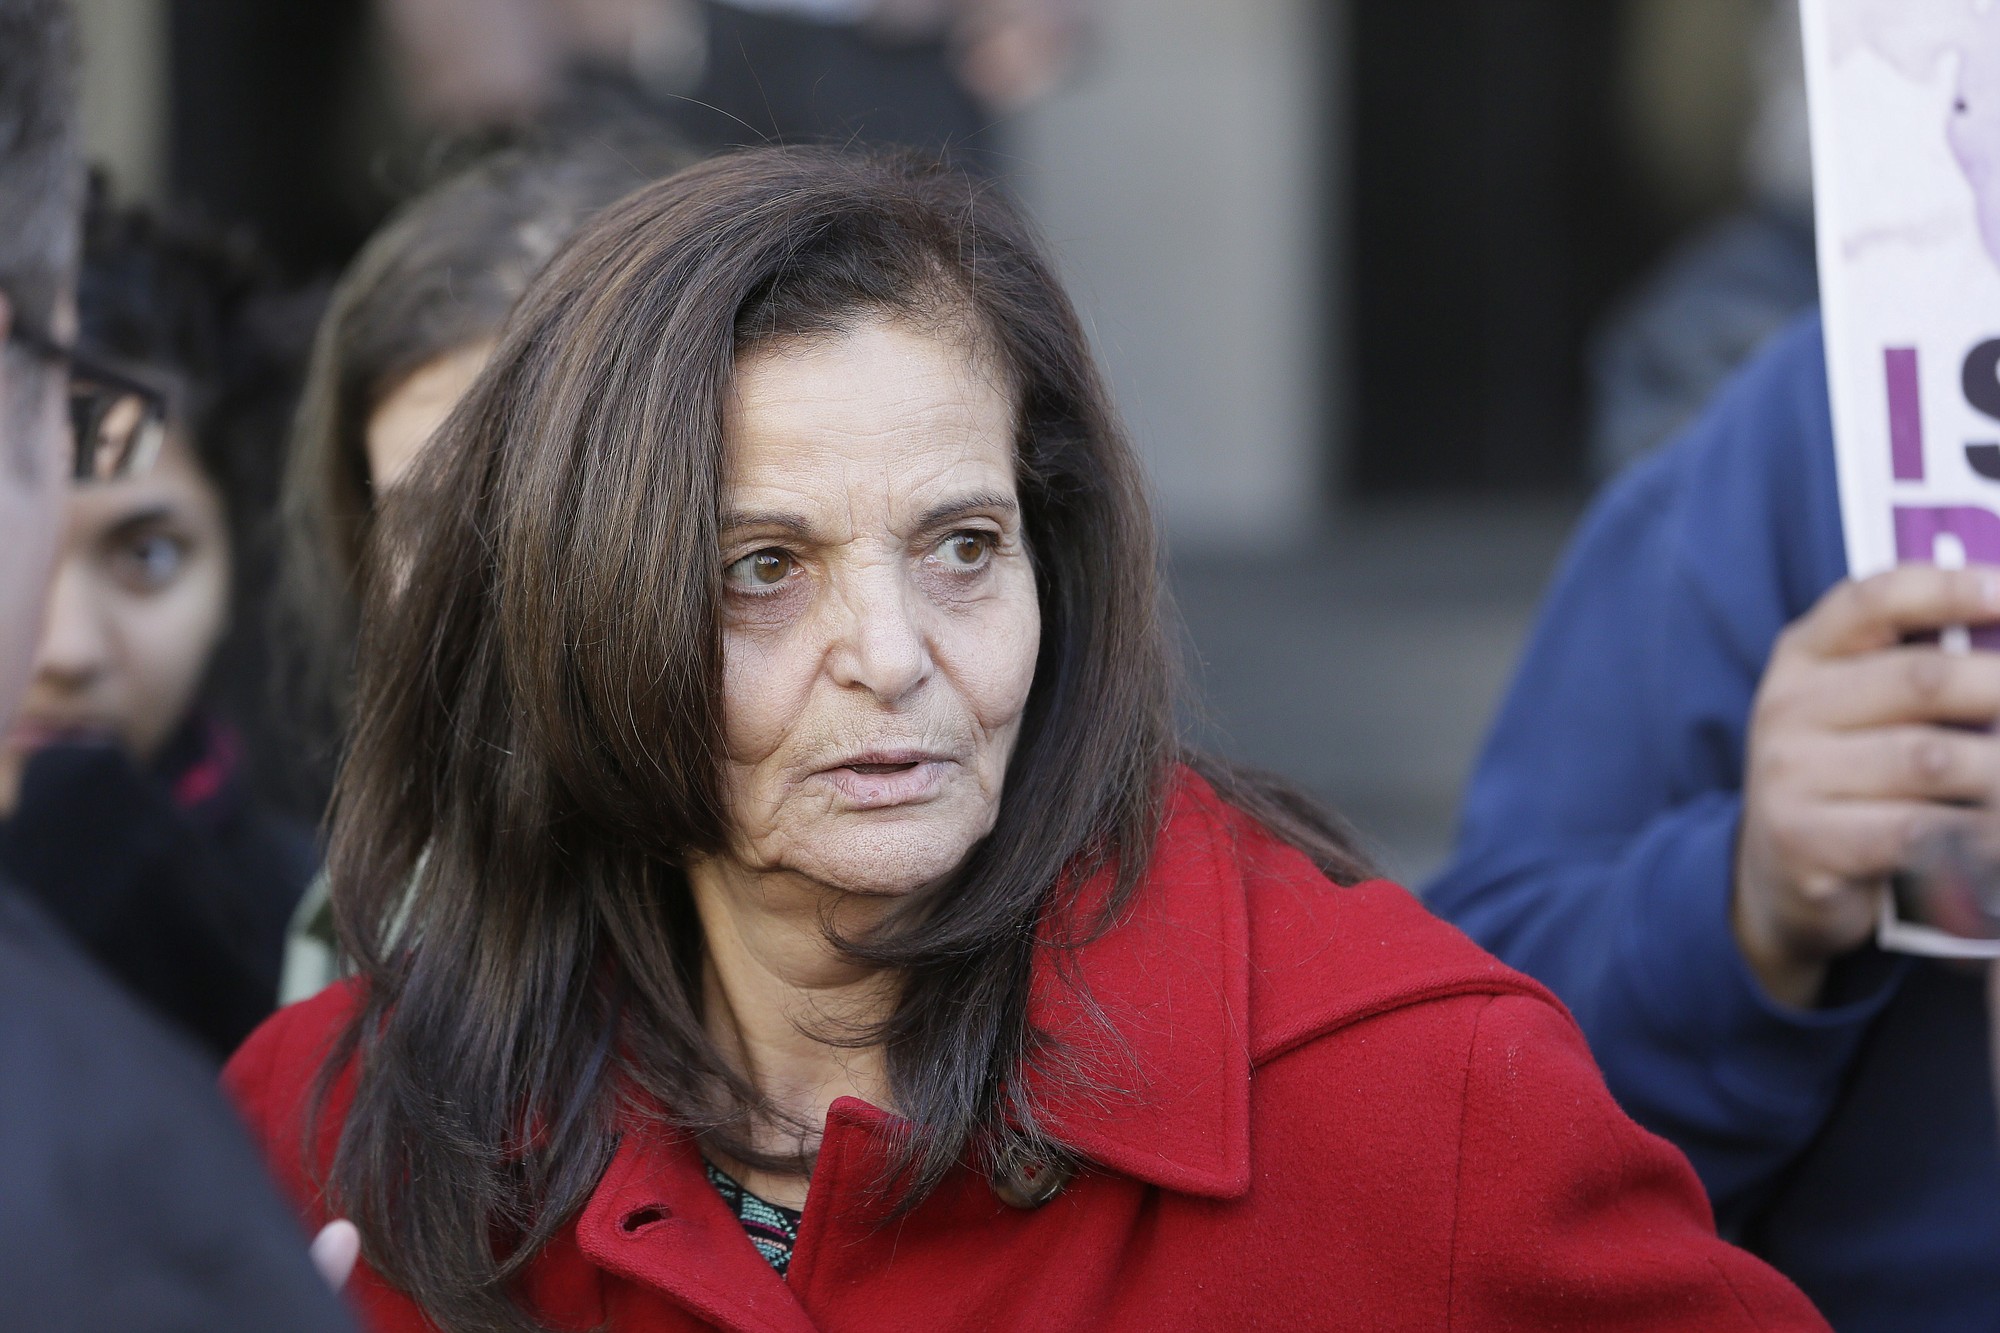 Rasmieh Yousef Odeh, 67, is interviewed outside federal court in Detroit on Monday after the Palestinian immigrant was found guilty of immigration fraud for failing to disclose her conviction and imprisonment in a Jerusalem supermarket bombing that killed two people.